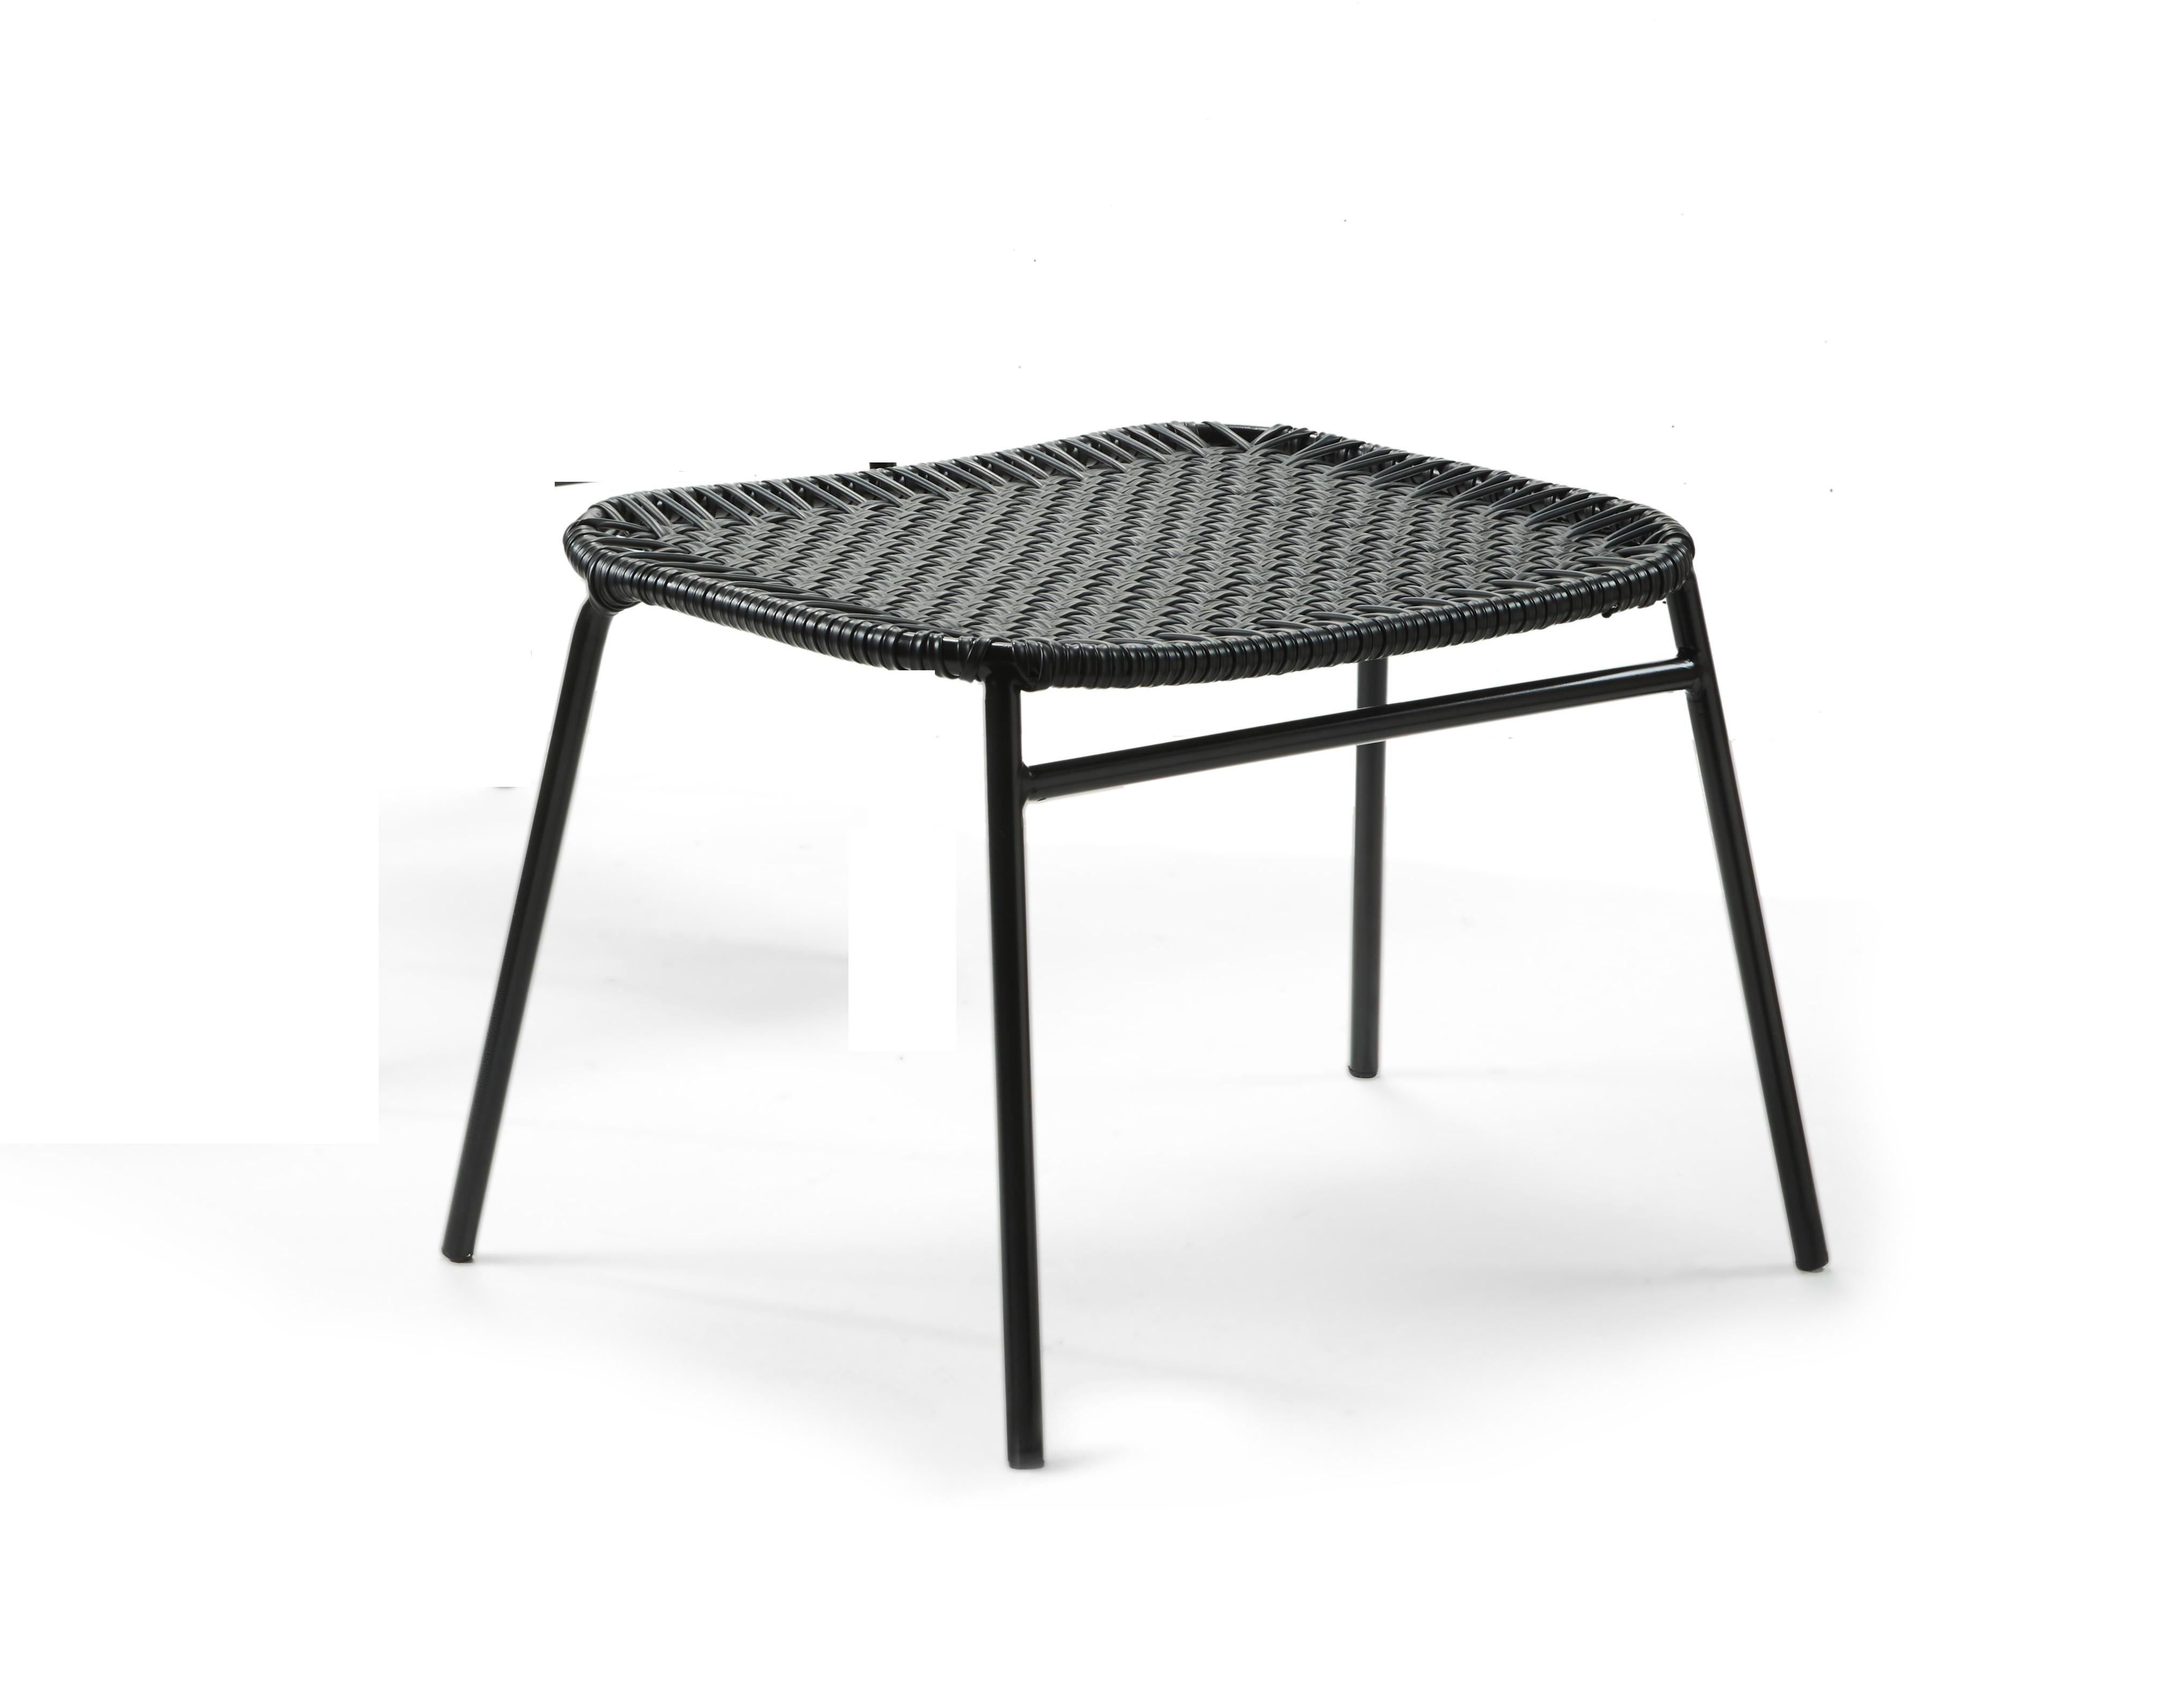 Black Cielo footstool by Sebastian Herkner
Materials: Galvanized and powder-coated tubular steel. PVC strings are made from recycled plastic.
Technique: Made from recycled plastic and weaved by local craftspeople in Cartagena, Colombia. 
Dimensions: